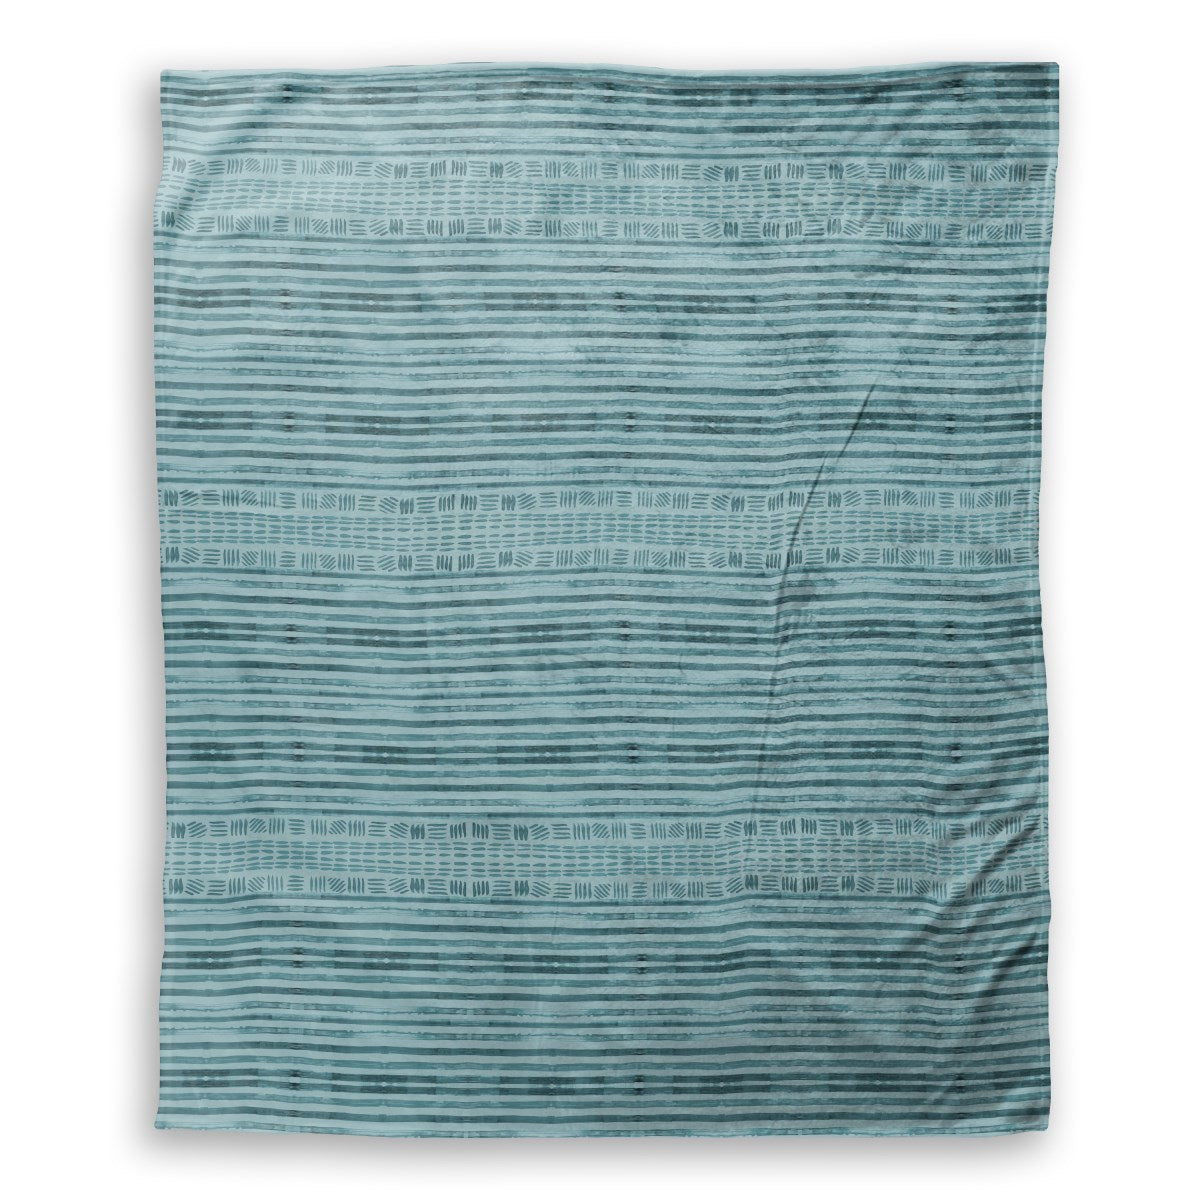 Throw blanket with stripes that are shades of blue, light blue, and green  - small - 50 x 60